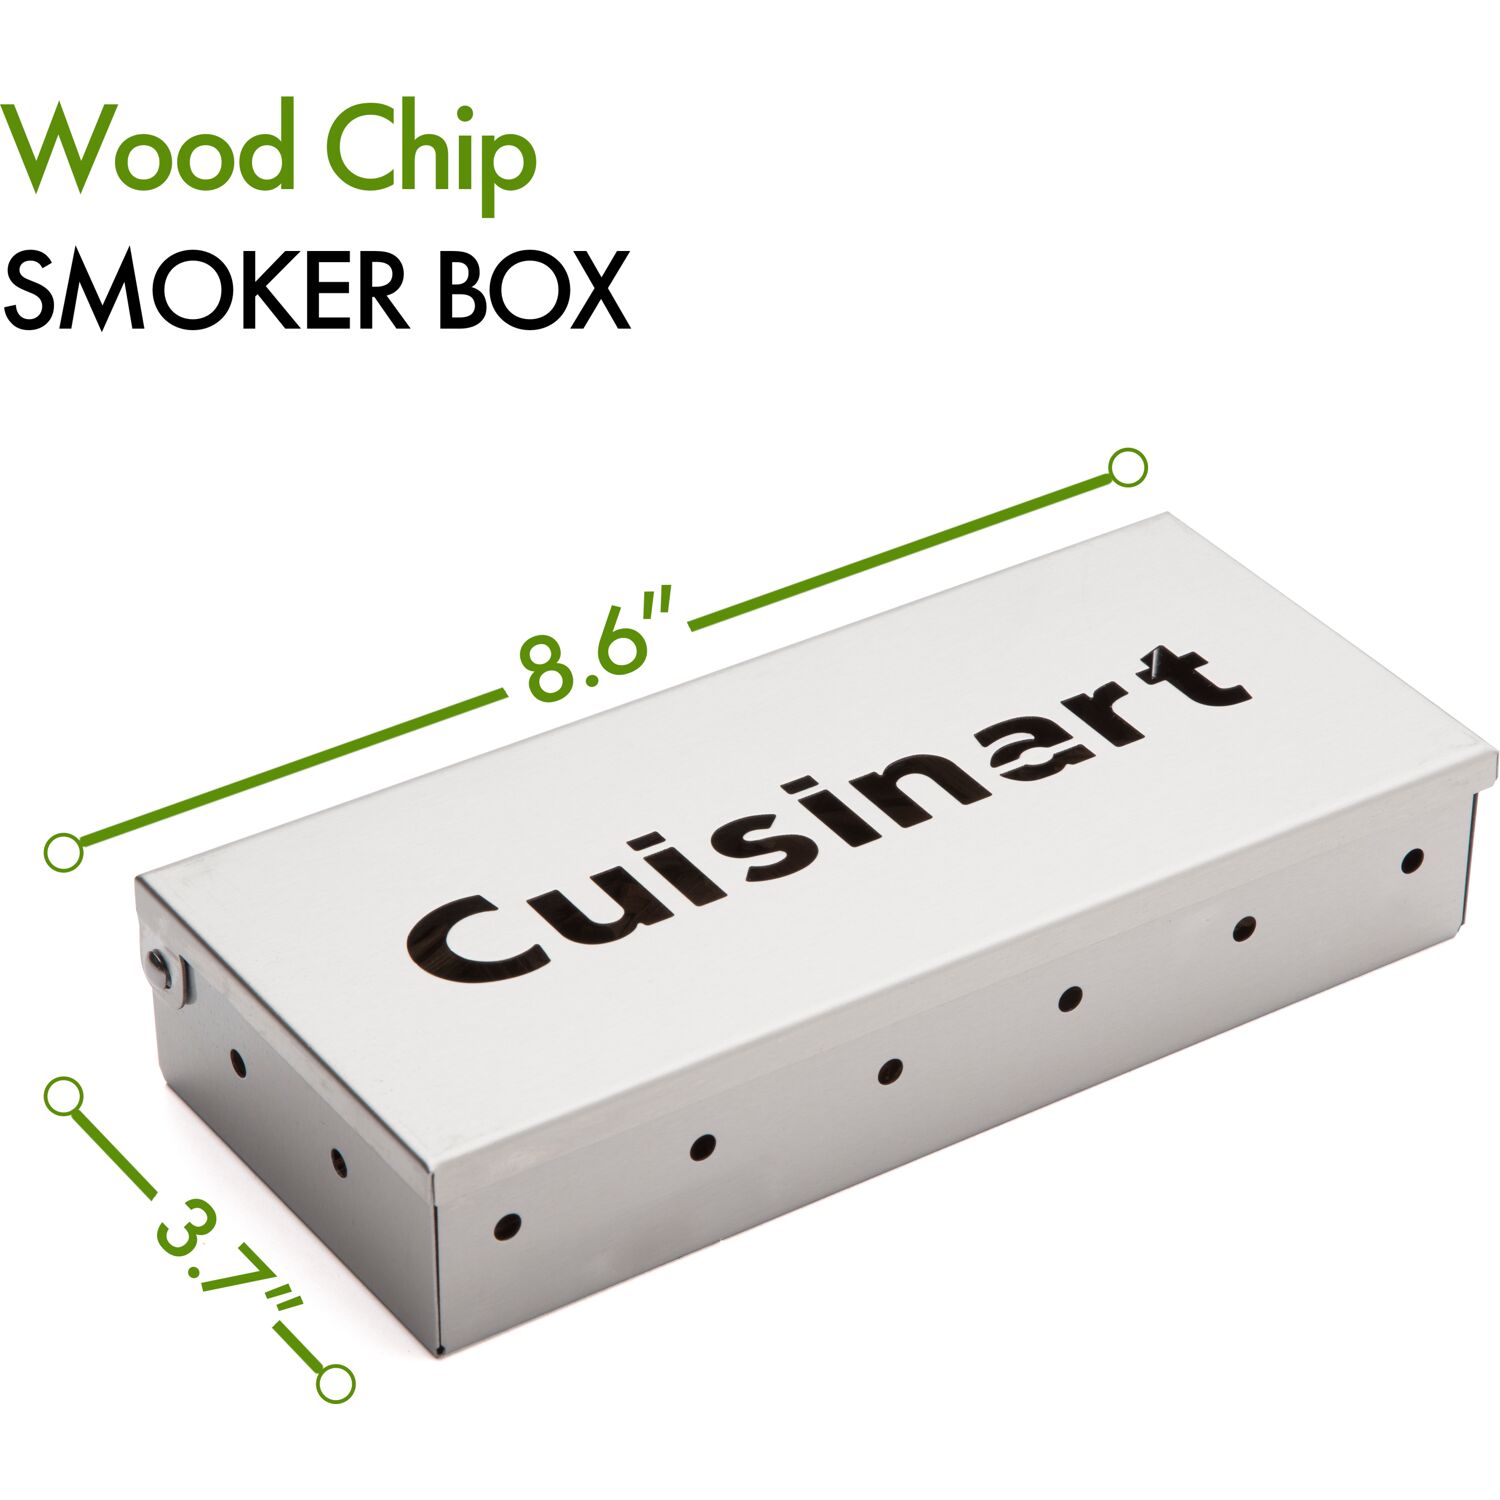 Cuisinart Wood Chip Smoker Box in Stainless Steel - image 5 of 8